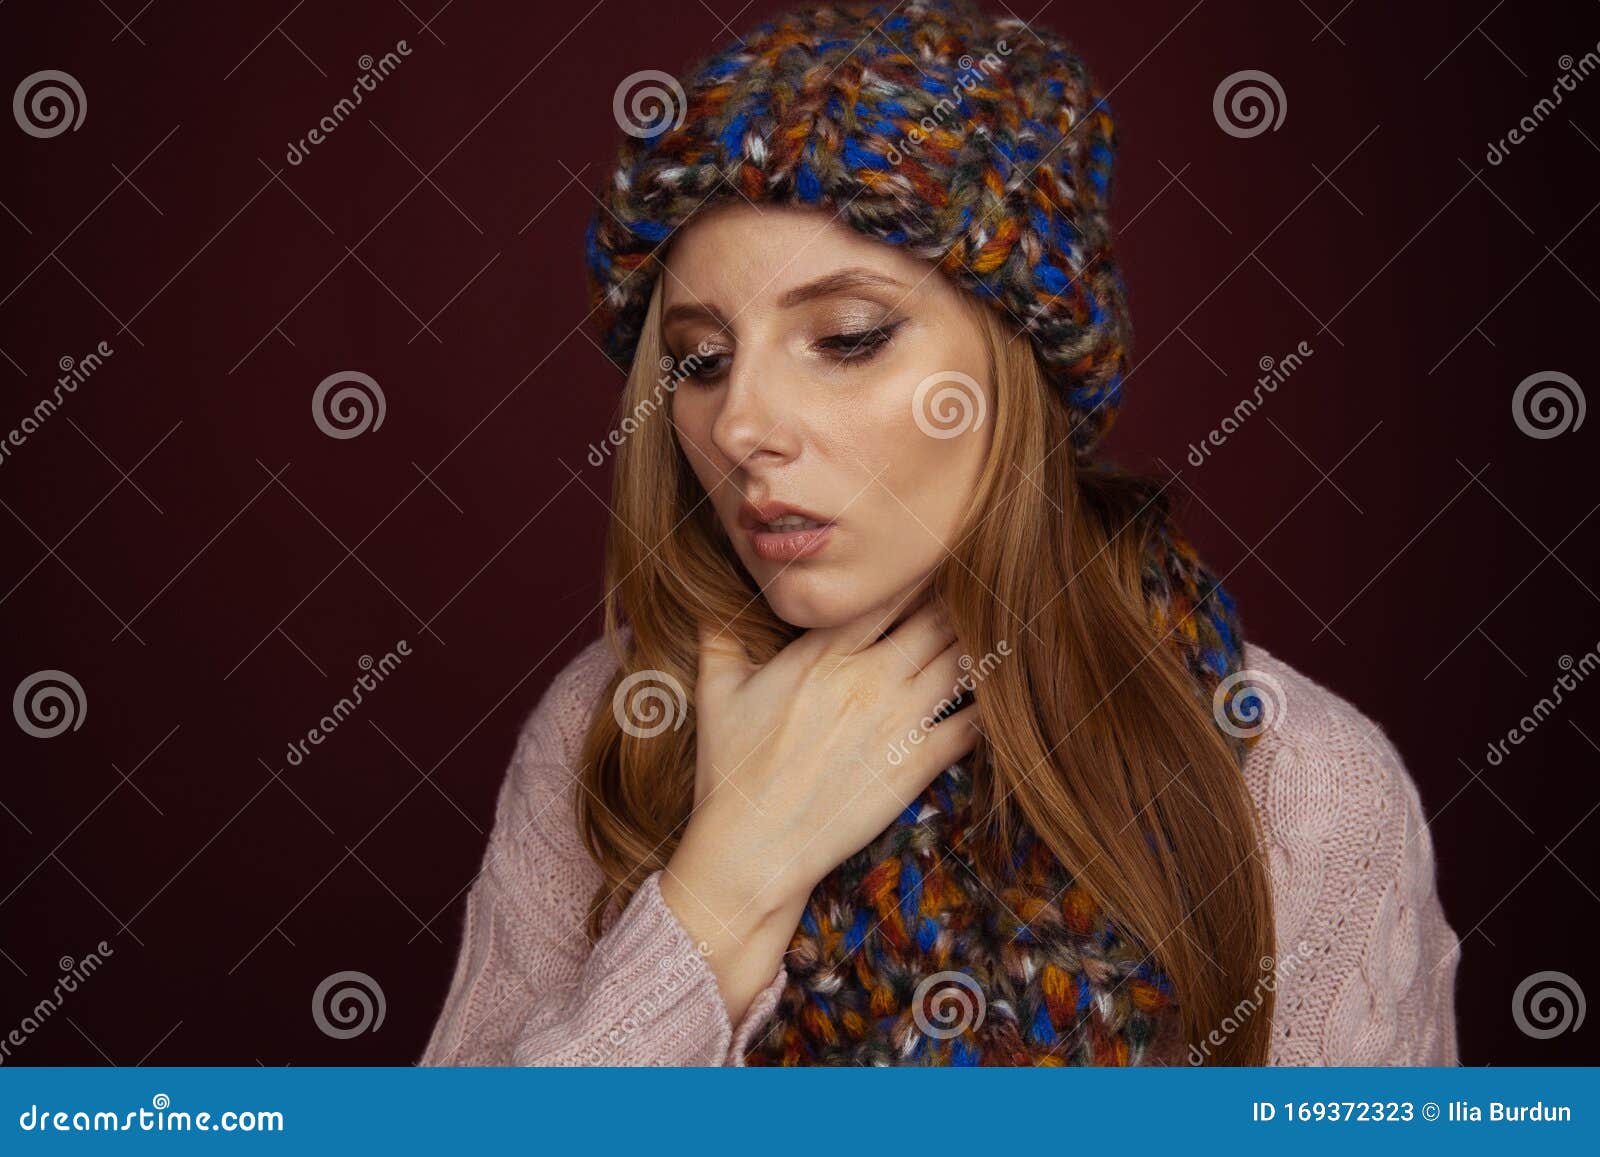 sore throat concept. sick woman in hat and scarf holding her nech and felling bad.